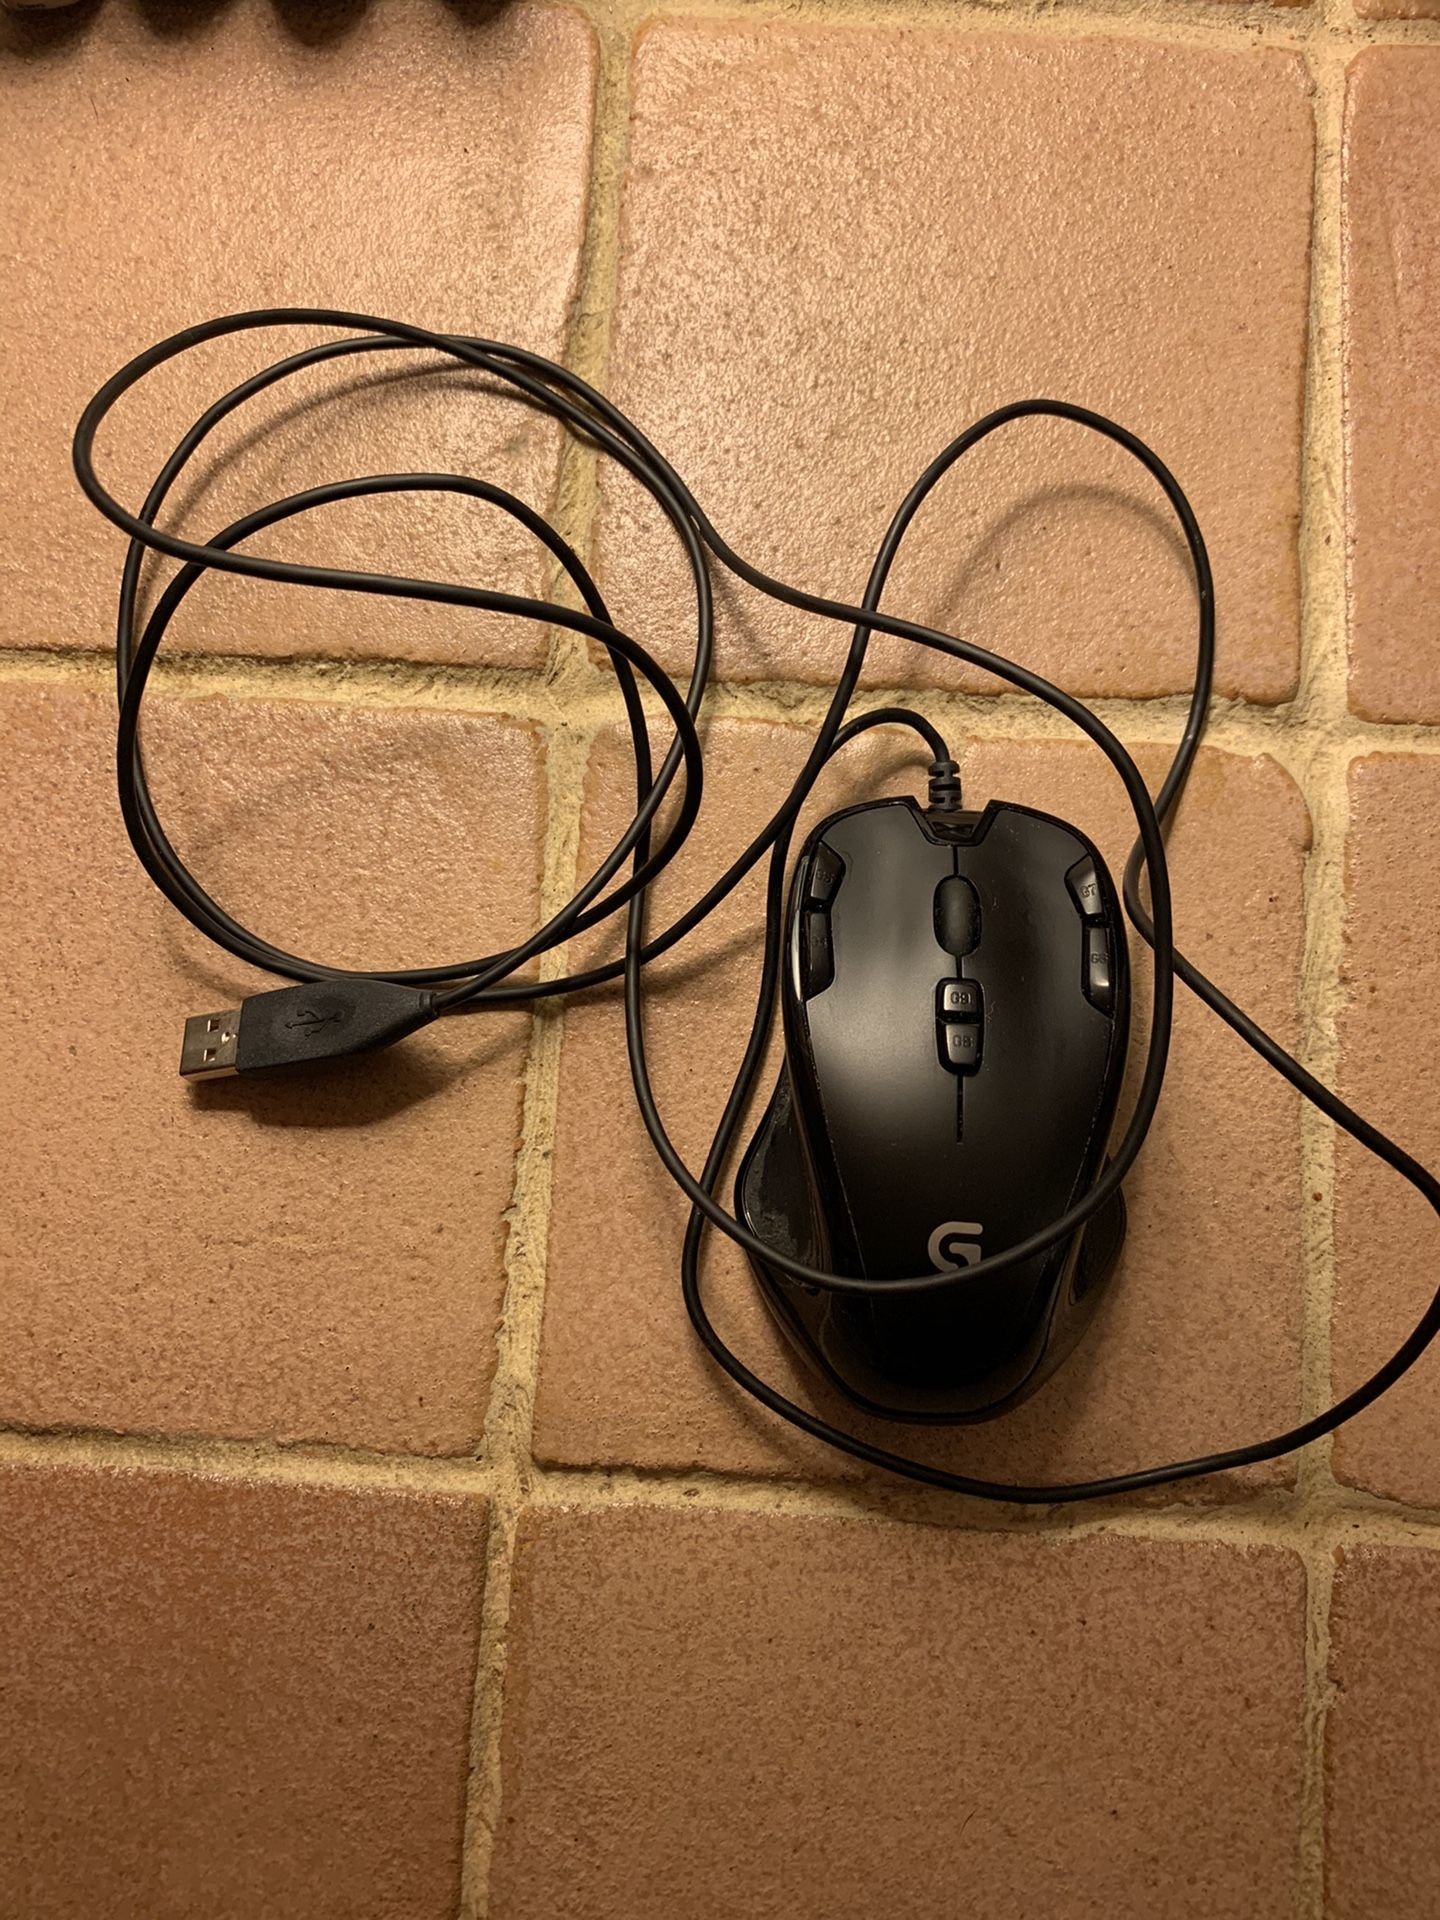 Logitech G300s Wired Optical Gaming Mouse